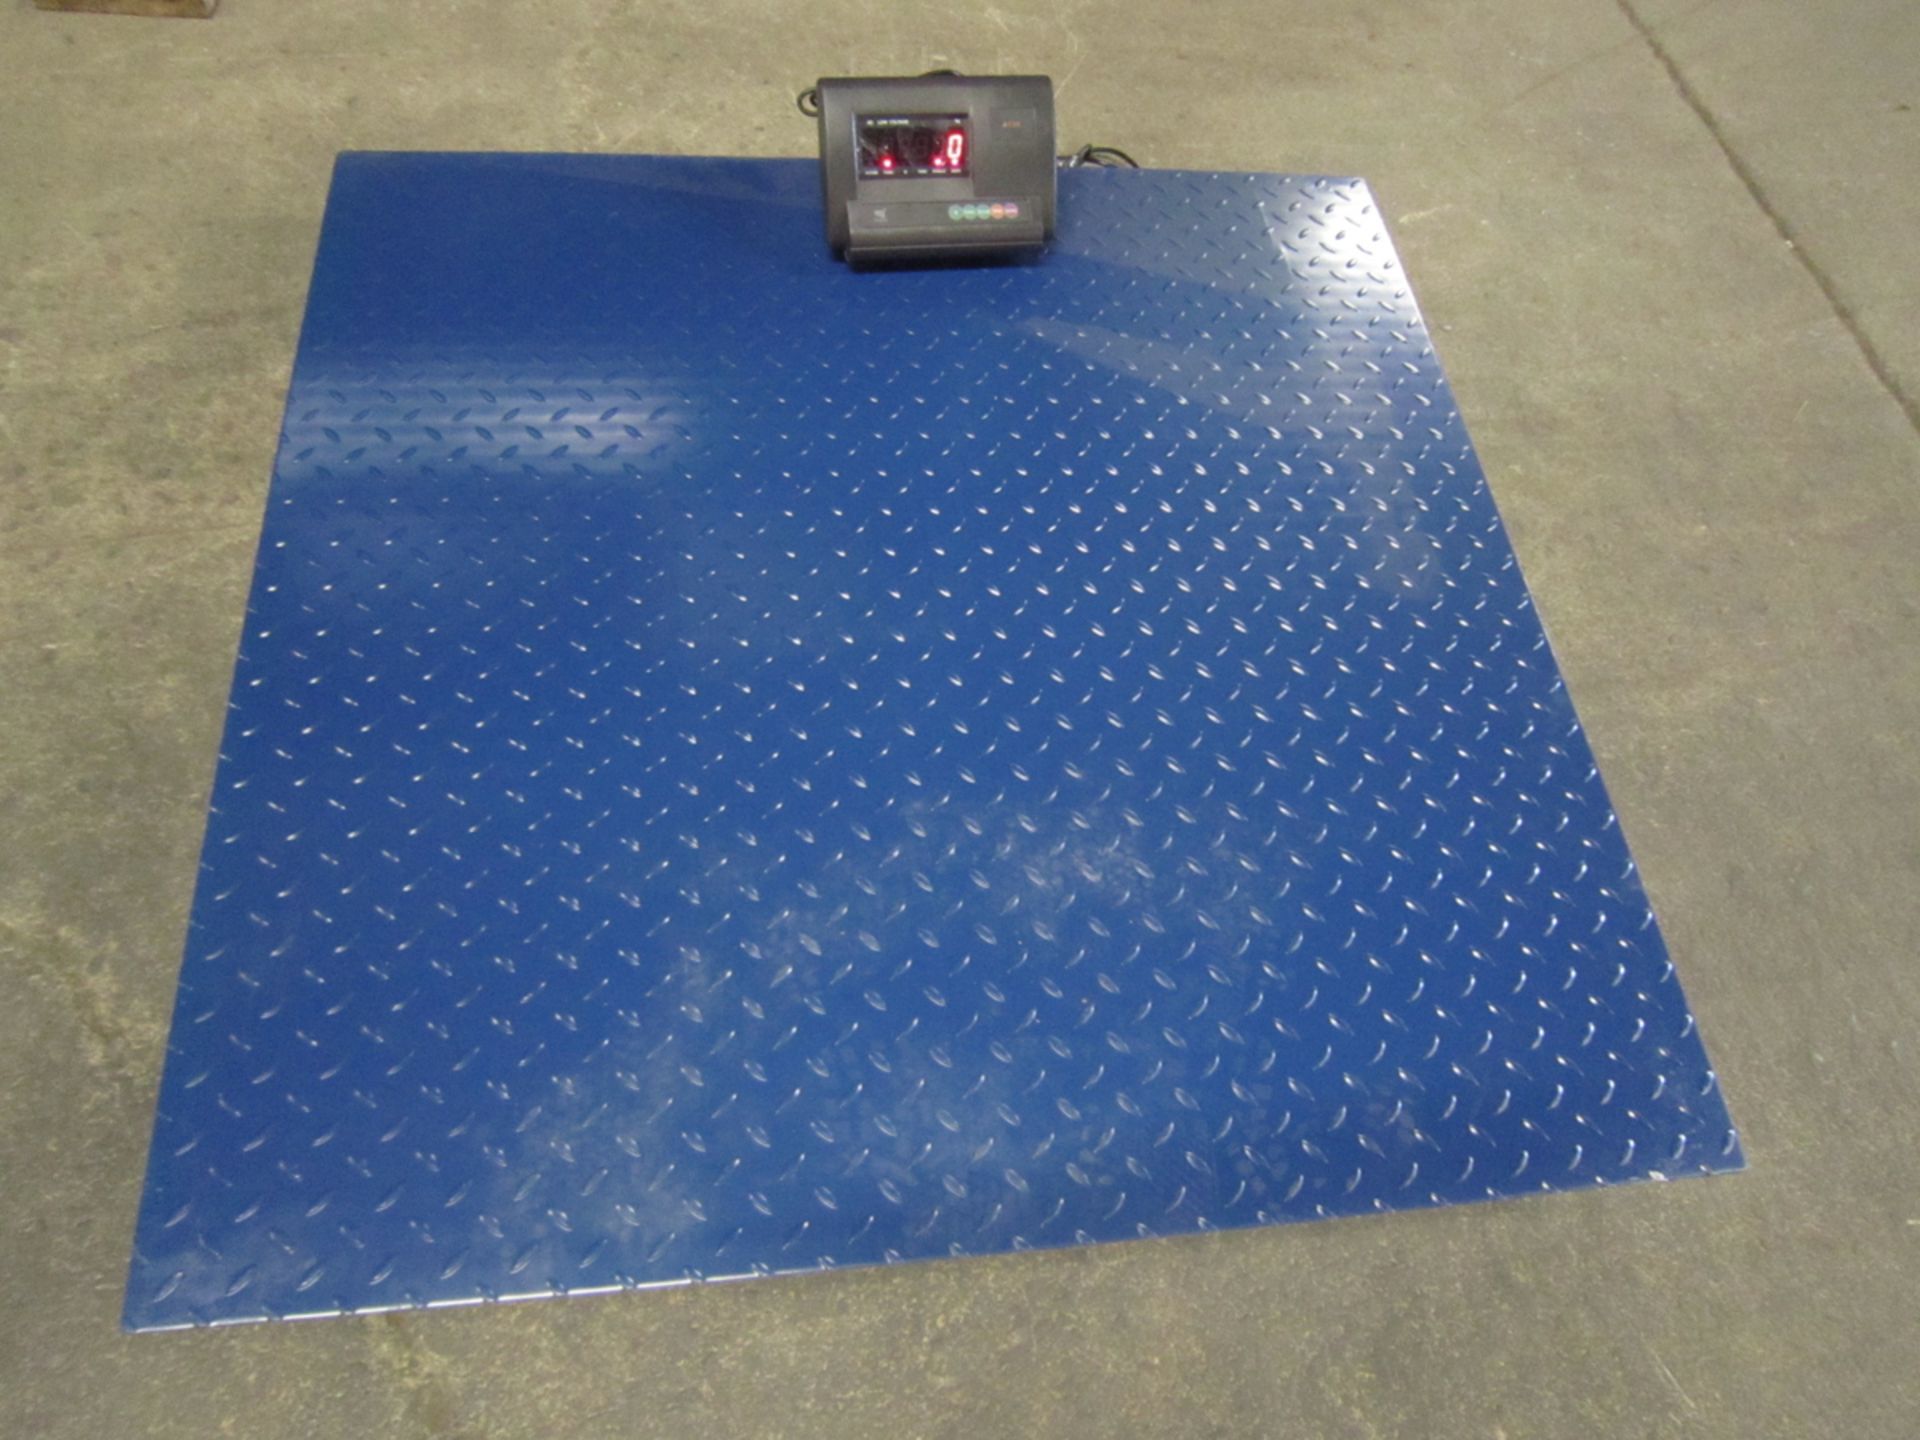 "NEW" 6500LB DIGITAL FLOOR SCALE - 48" X 48" - GREAT DRO WITH 1LB ACCURACY (LOCATED IN HAMILTON,